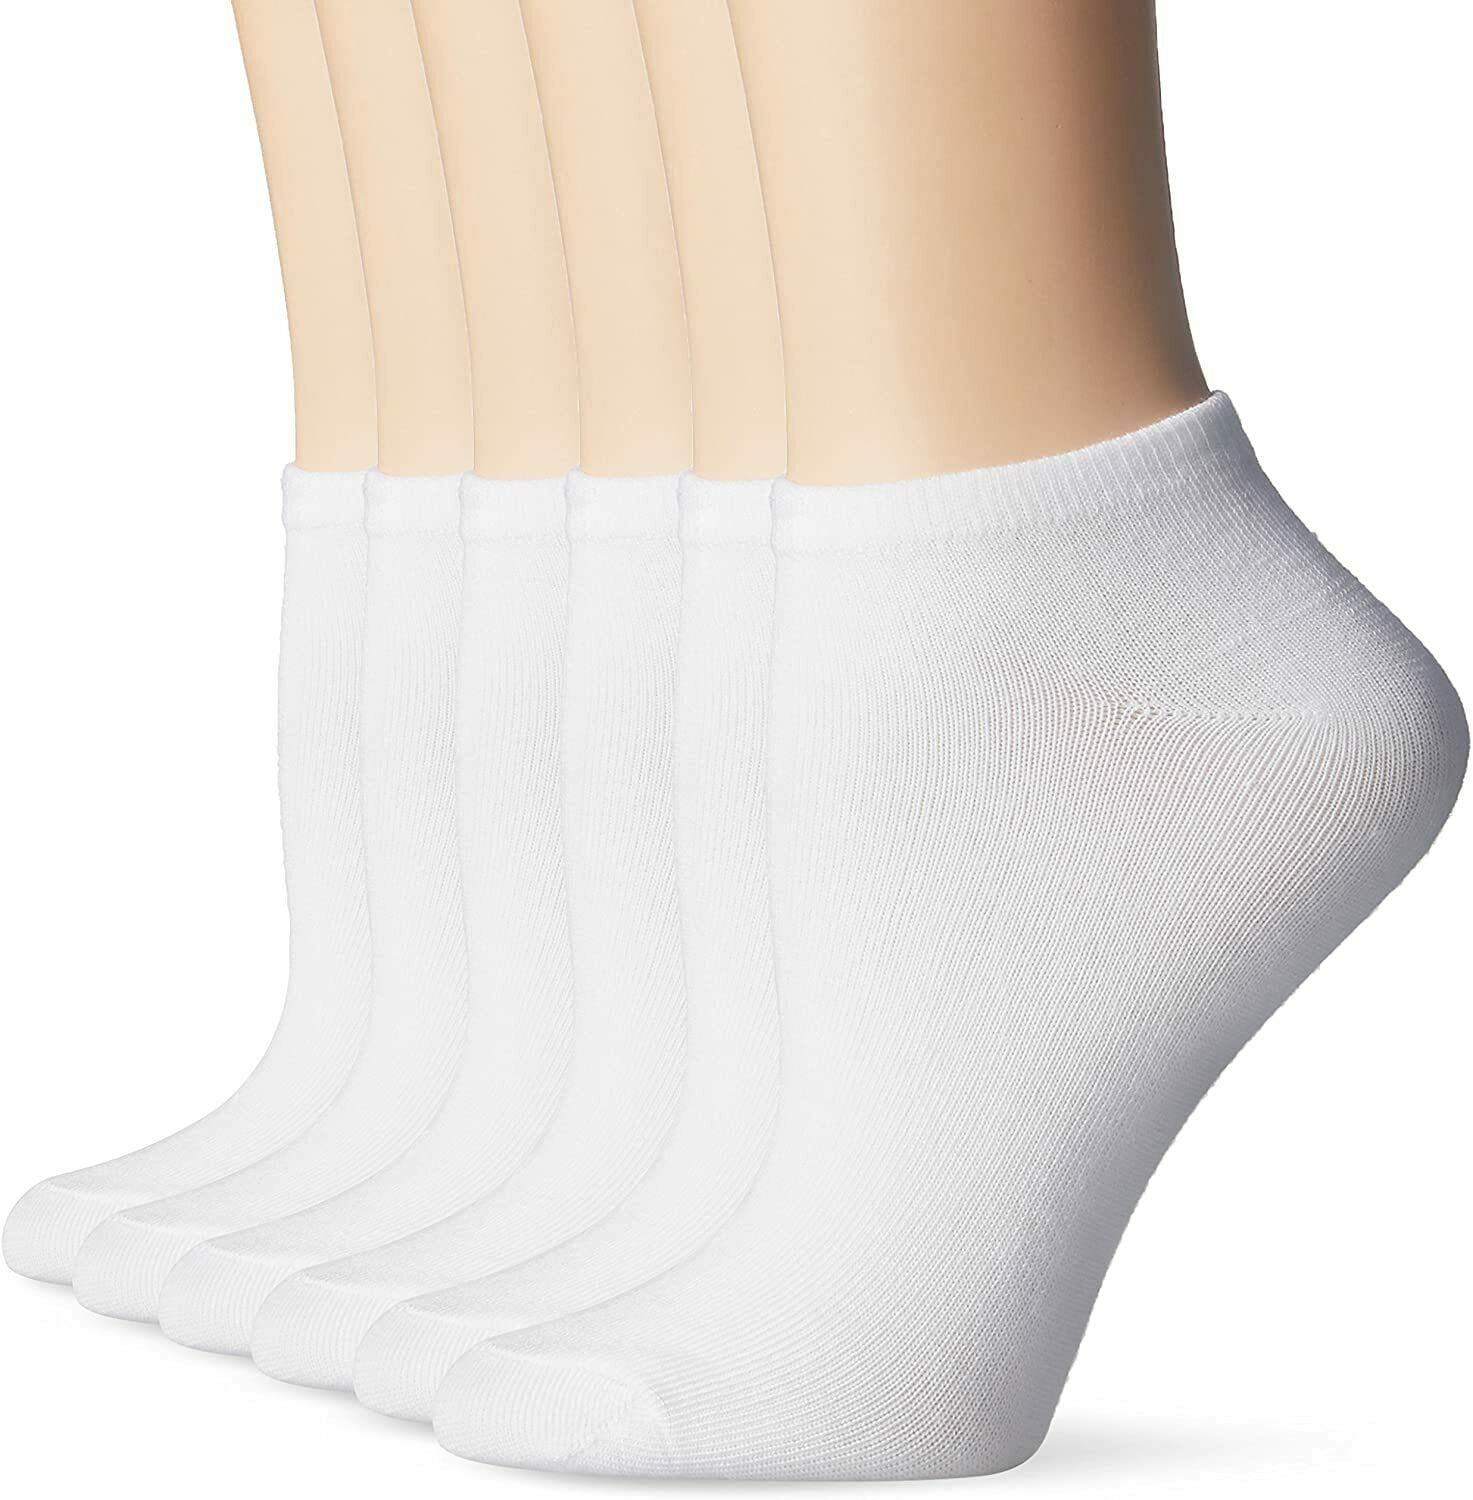 Essentials Womens 6-Pack Performance Cotton Cushioned Athletic Ankle Socks 6-9 White Shoe Size 